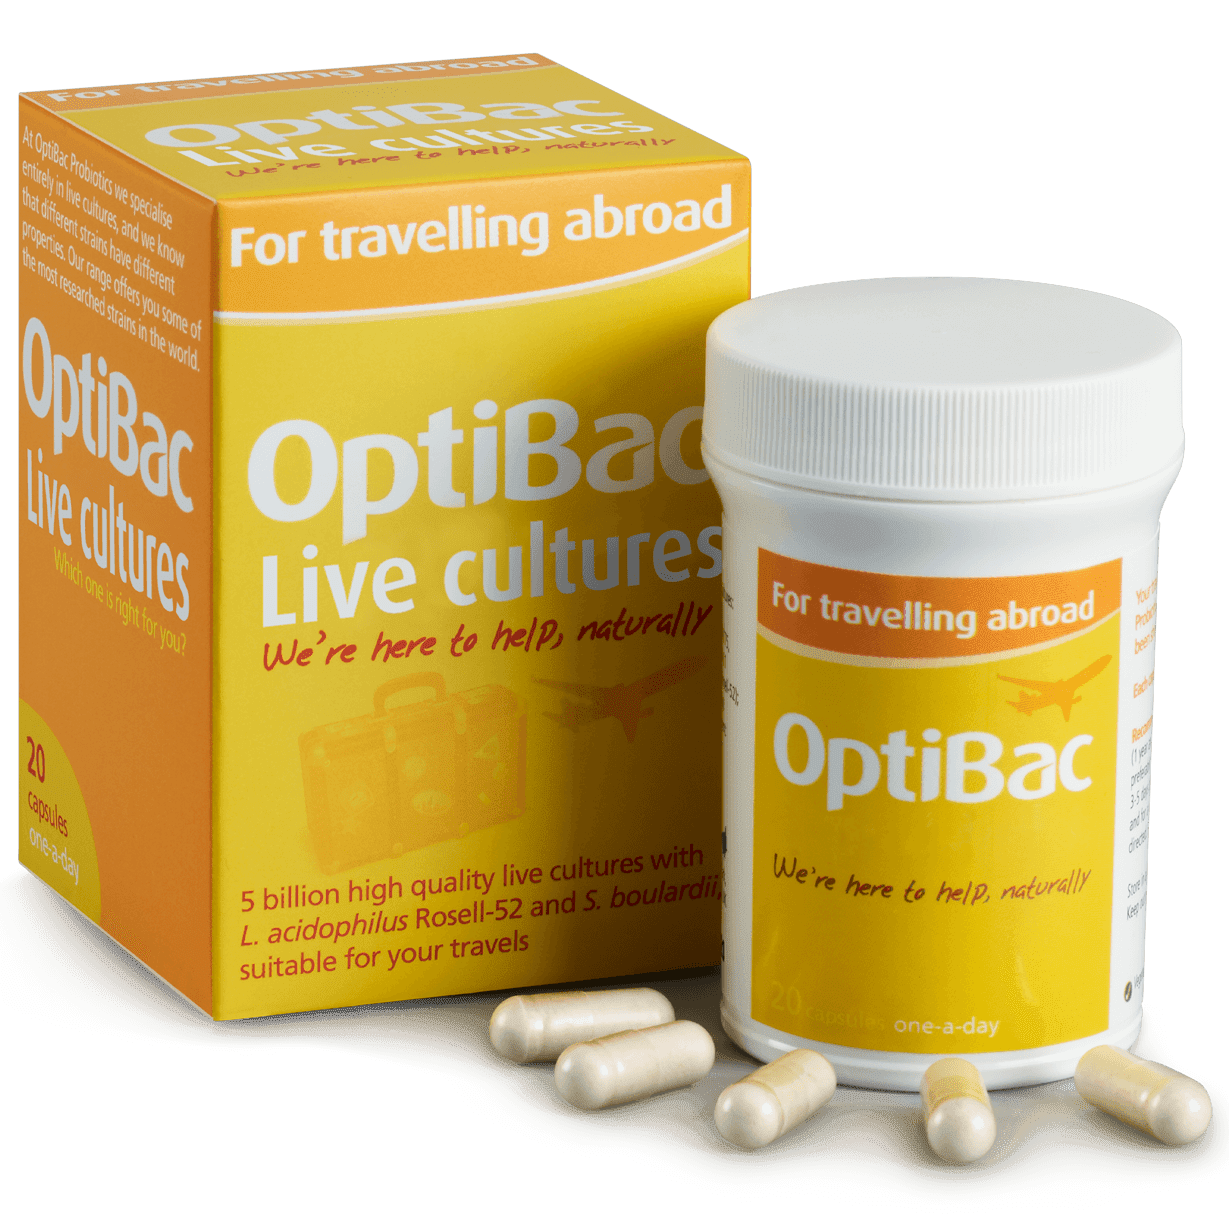 Optibac Probiotics For travelling abroad (20 capsules) pack contents